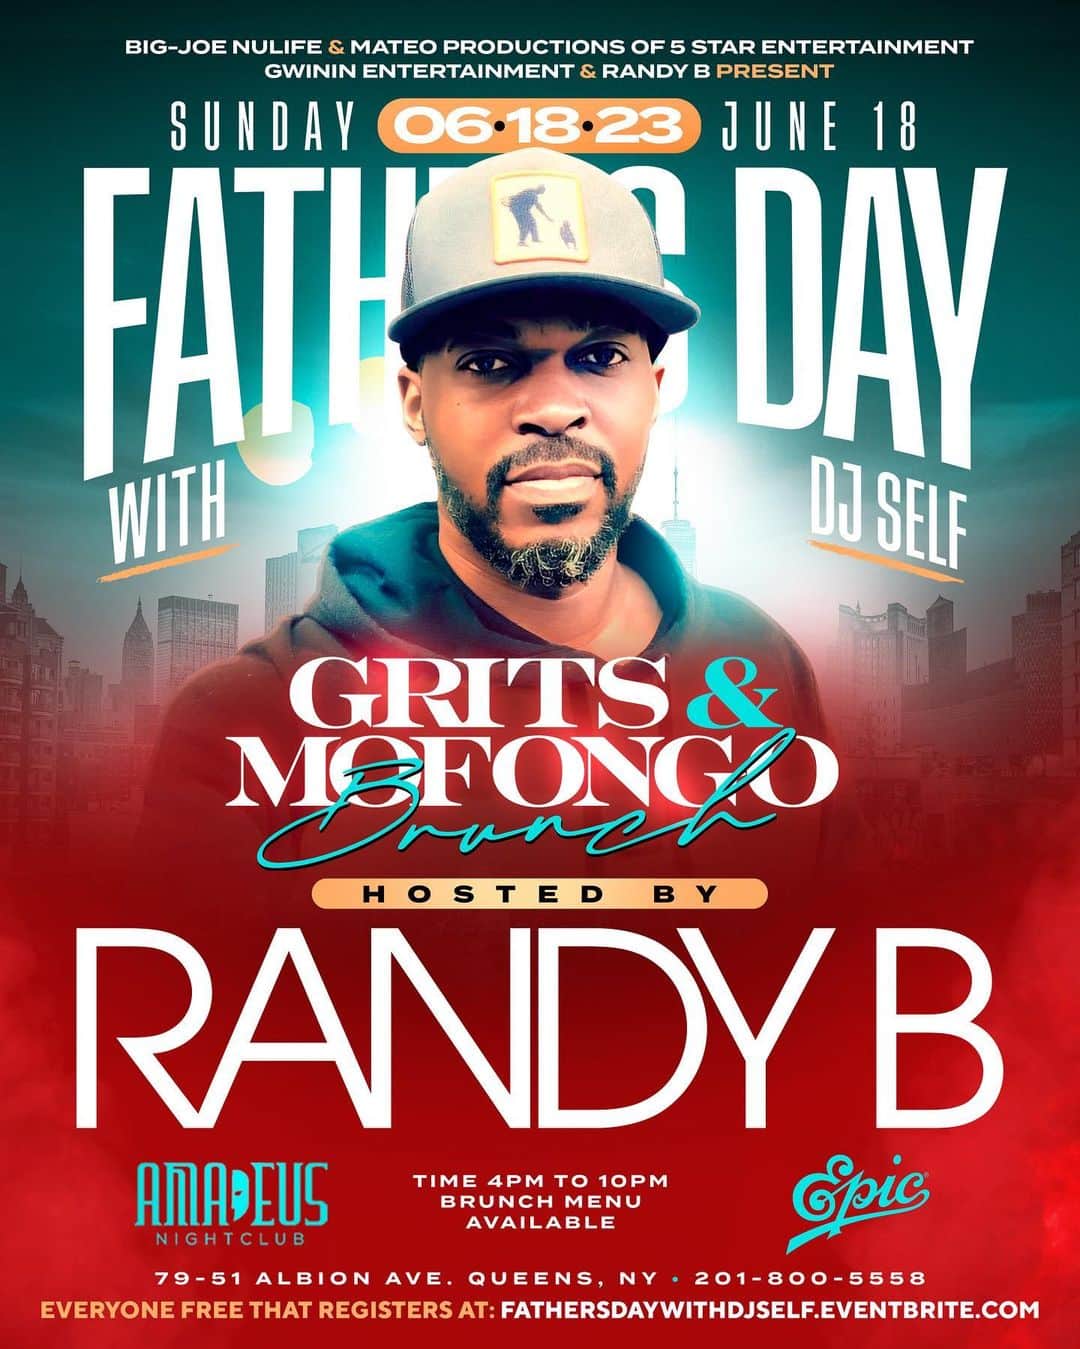 DJ Selfさんのインスタグラム写真 - (DJ SelfInstagram)「We gotta do suttin for Father’s Day !!!! So i got you!!!    Grits and Mofungo!!!!!!!  Sunday, June 18th, 2023 Father’s Day !!!!!!Fathers day !!!!!!!  DJ Self's Special Father's Day Brunch   "GRITS & MOFONGO"  Amadeus | @clubamadeusny 79-51 Albion Ave, Queens, NY 11373 201-800-5558  Music Provided by:  The Heavy Hitter @djcamilo 💥  The  Gwinin Gawd @djself 💥  Alongside: @ralpiemercado 🔥 @iamfrankroth 🔥 @djperfect203 🔥  Doors open 4pm - 10pm  EVERYONE FREE That Registers At: FathersDayWithDJSelf.EventBrite.com   For all the details DM me or log onto:  www.BigJoeNuLife.com  #DJCamilo #DJSelf #BigJoeNuLife #KnockyNuLife #Mateo #RalphieMercado #Amadeus #Queens #Sunday #WeOutside #FathersDayWithDJSelf #GritsAndMofongo 💥💥💥」6月18日 7時01分 - djself